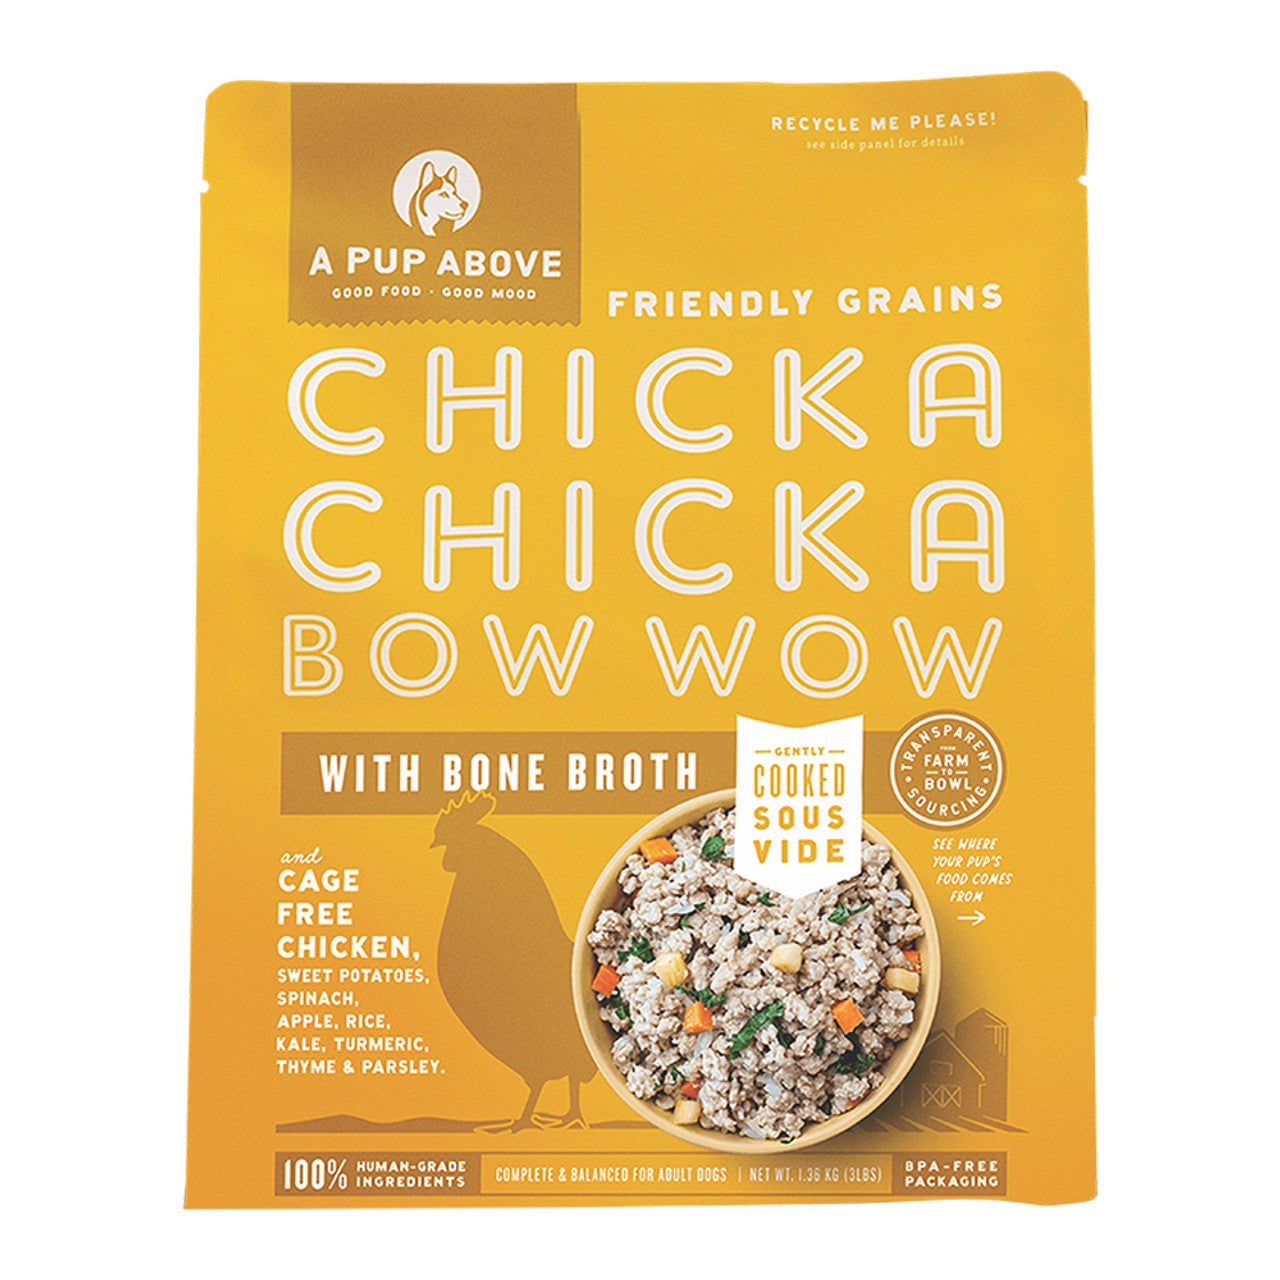 A Pup Above Gently Cooked Friendly Grains Chicka Chicka Bow Wow w/ Bone Broth Frozen Dog Food 3lb